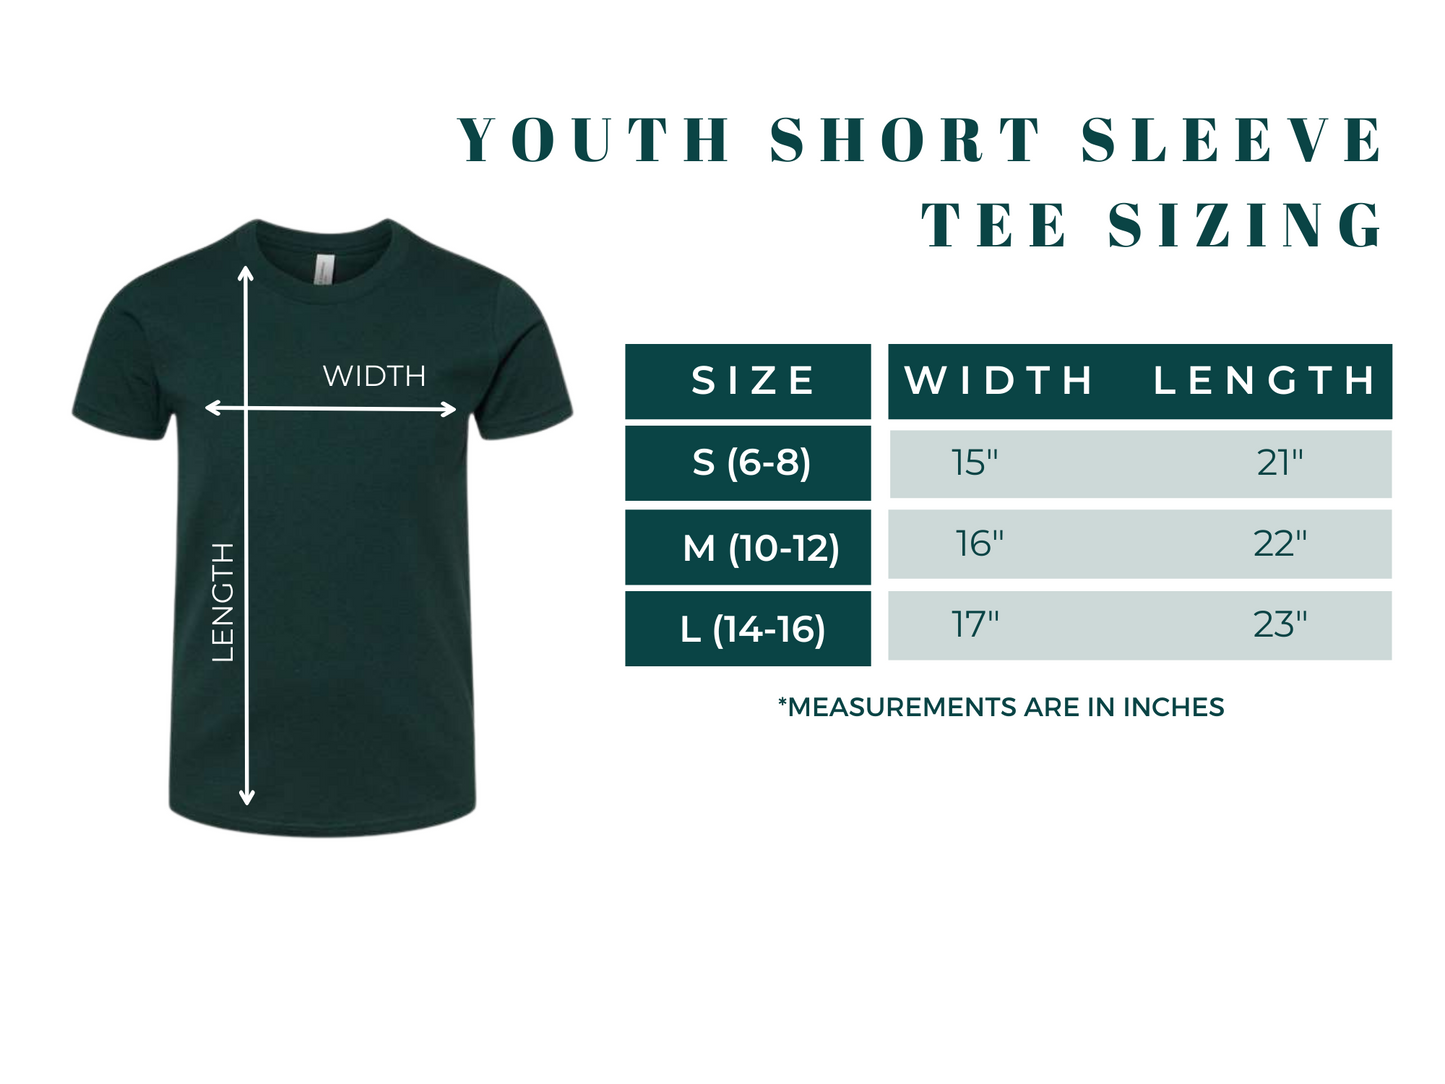 Sunkissed | Short Sleeve Youth Tee | Closeout